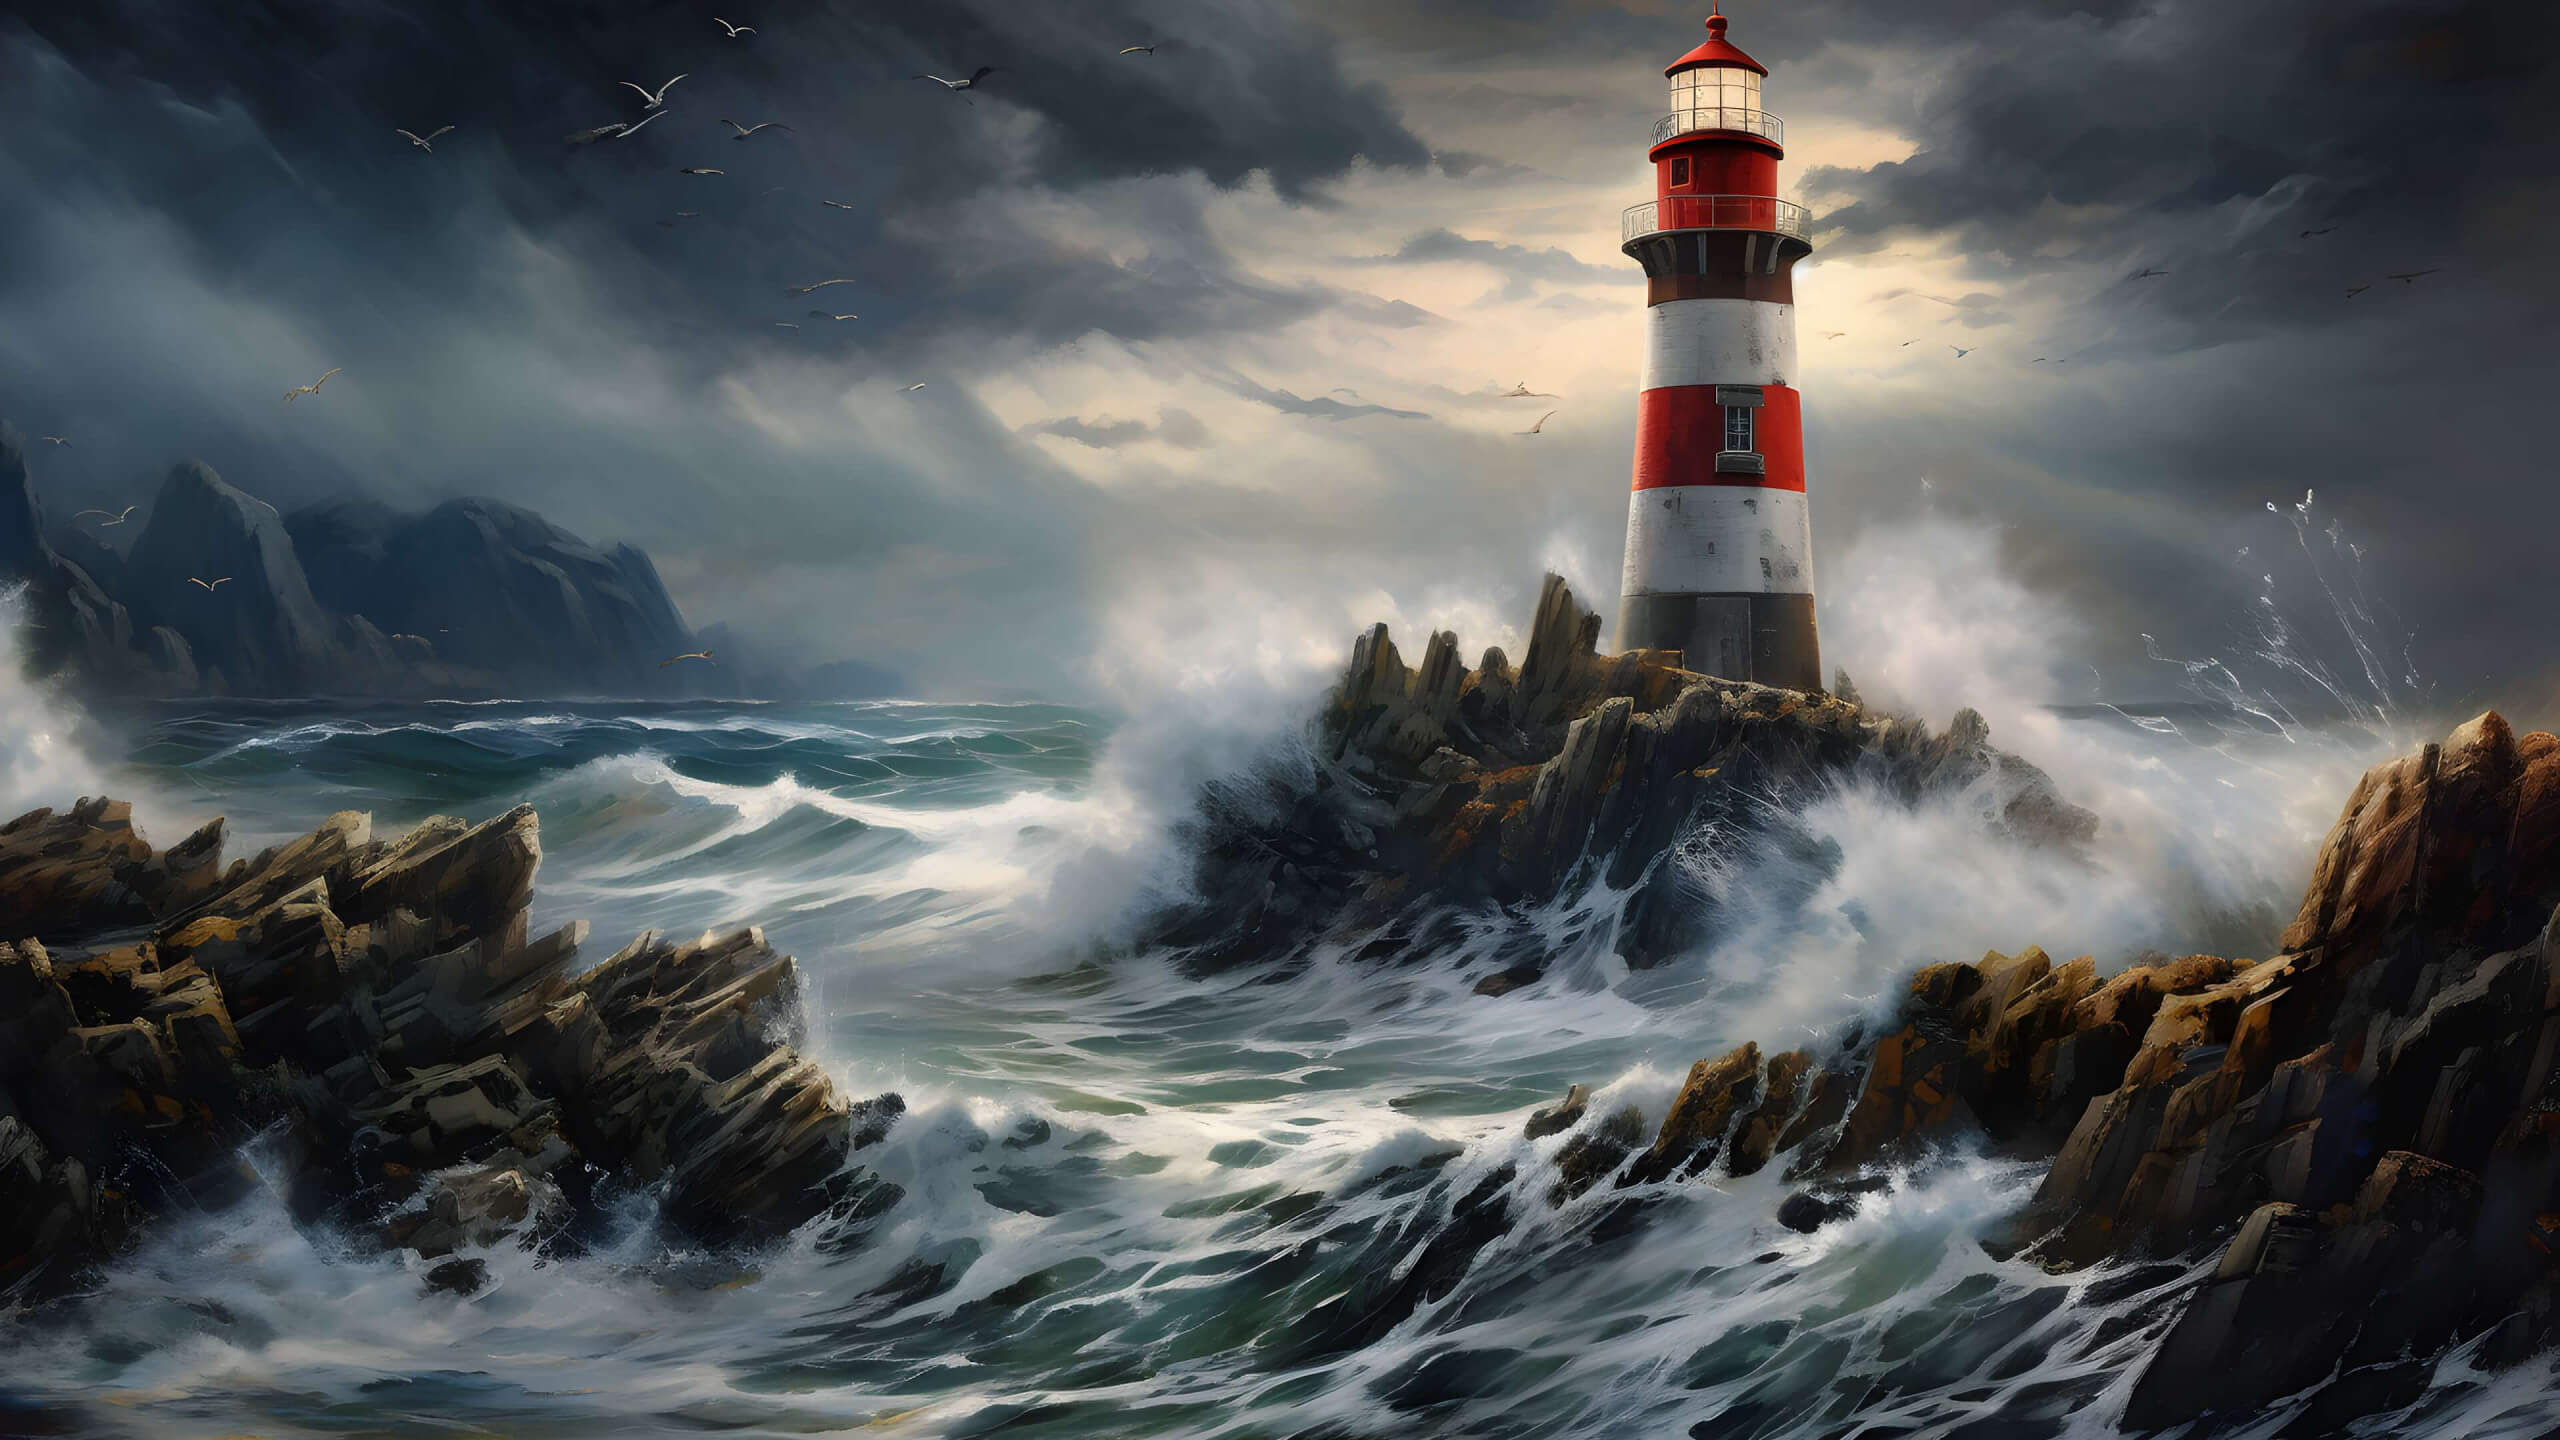 Lighthouse in the ocean waves wallpaper 2560x1440